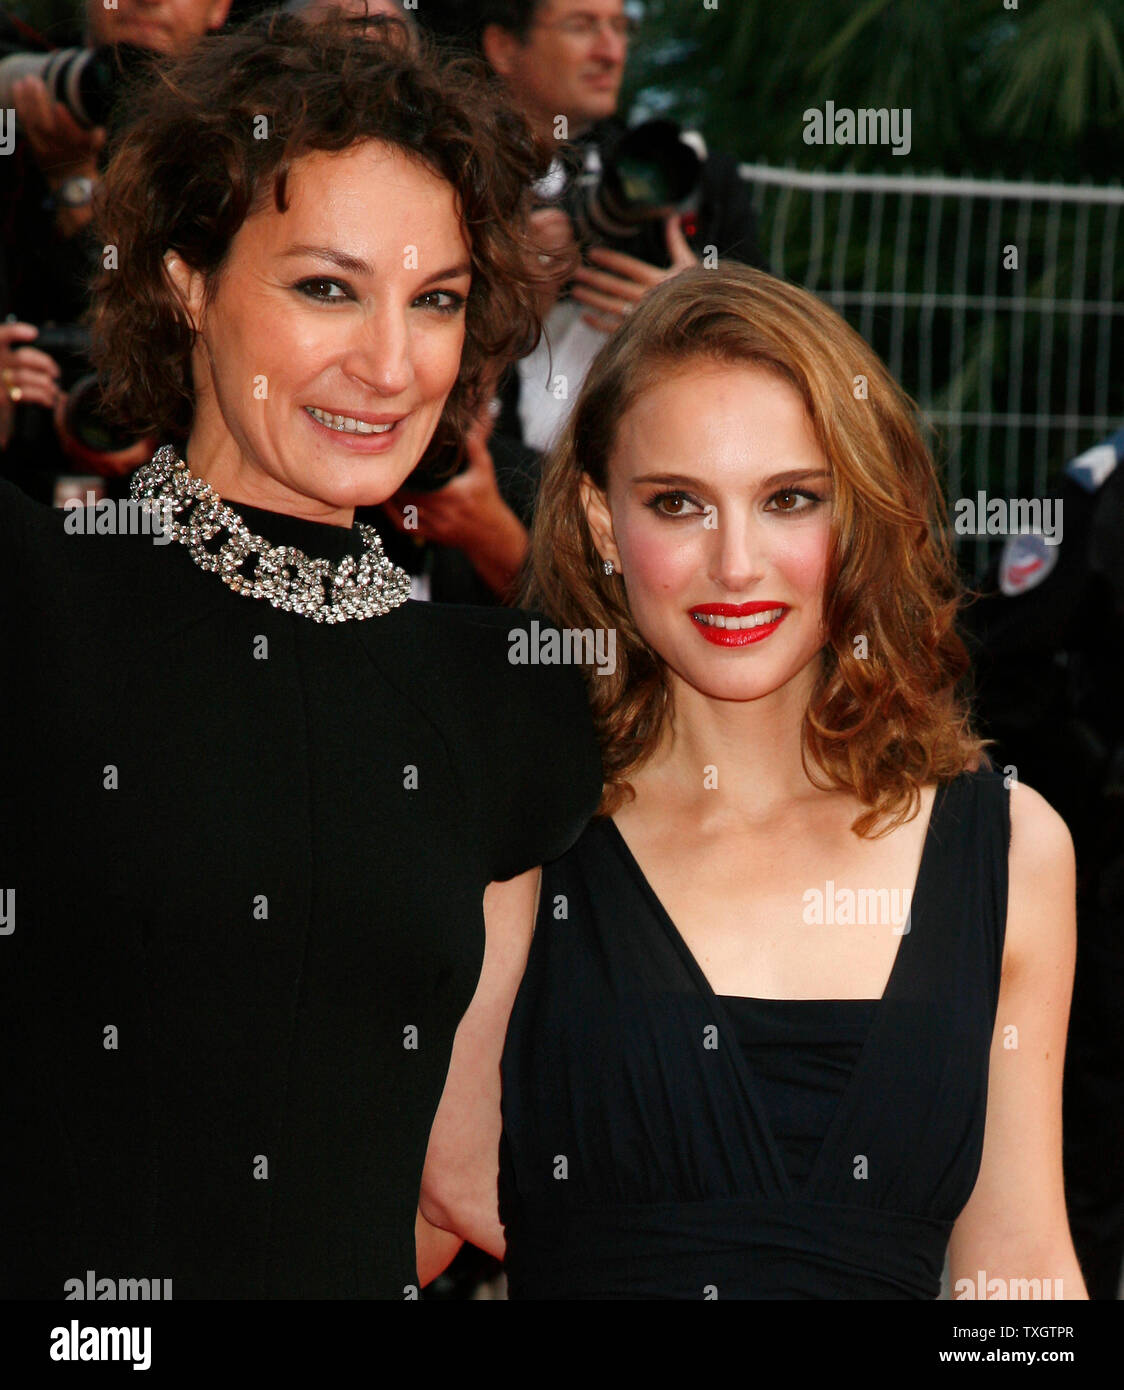 Actresses and jury members Jeanne Balibar (L) and Nathalie Portman arrive on the red carpet before the world premiere of the film 'Indiana Jones 4: Kingdom of the Crystal Skull' during the 61st Annual Cannes Film Festival in Cannes, France on May 18, 2008.   (UPI Photo/David Silpa) Stock Photo